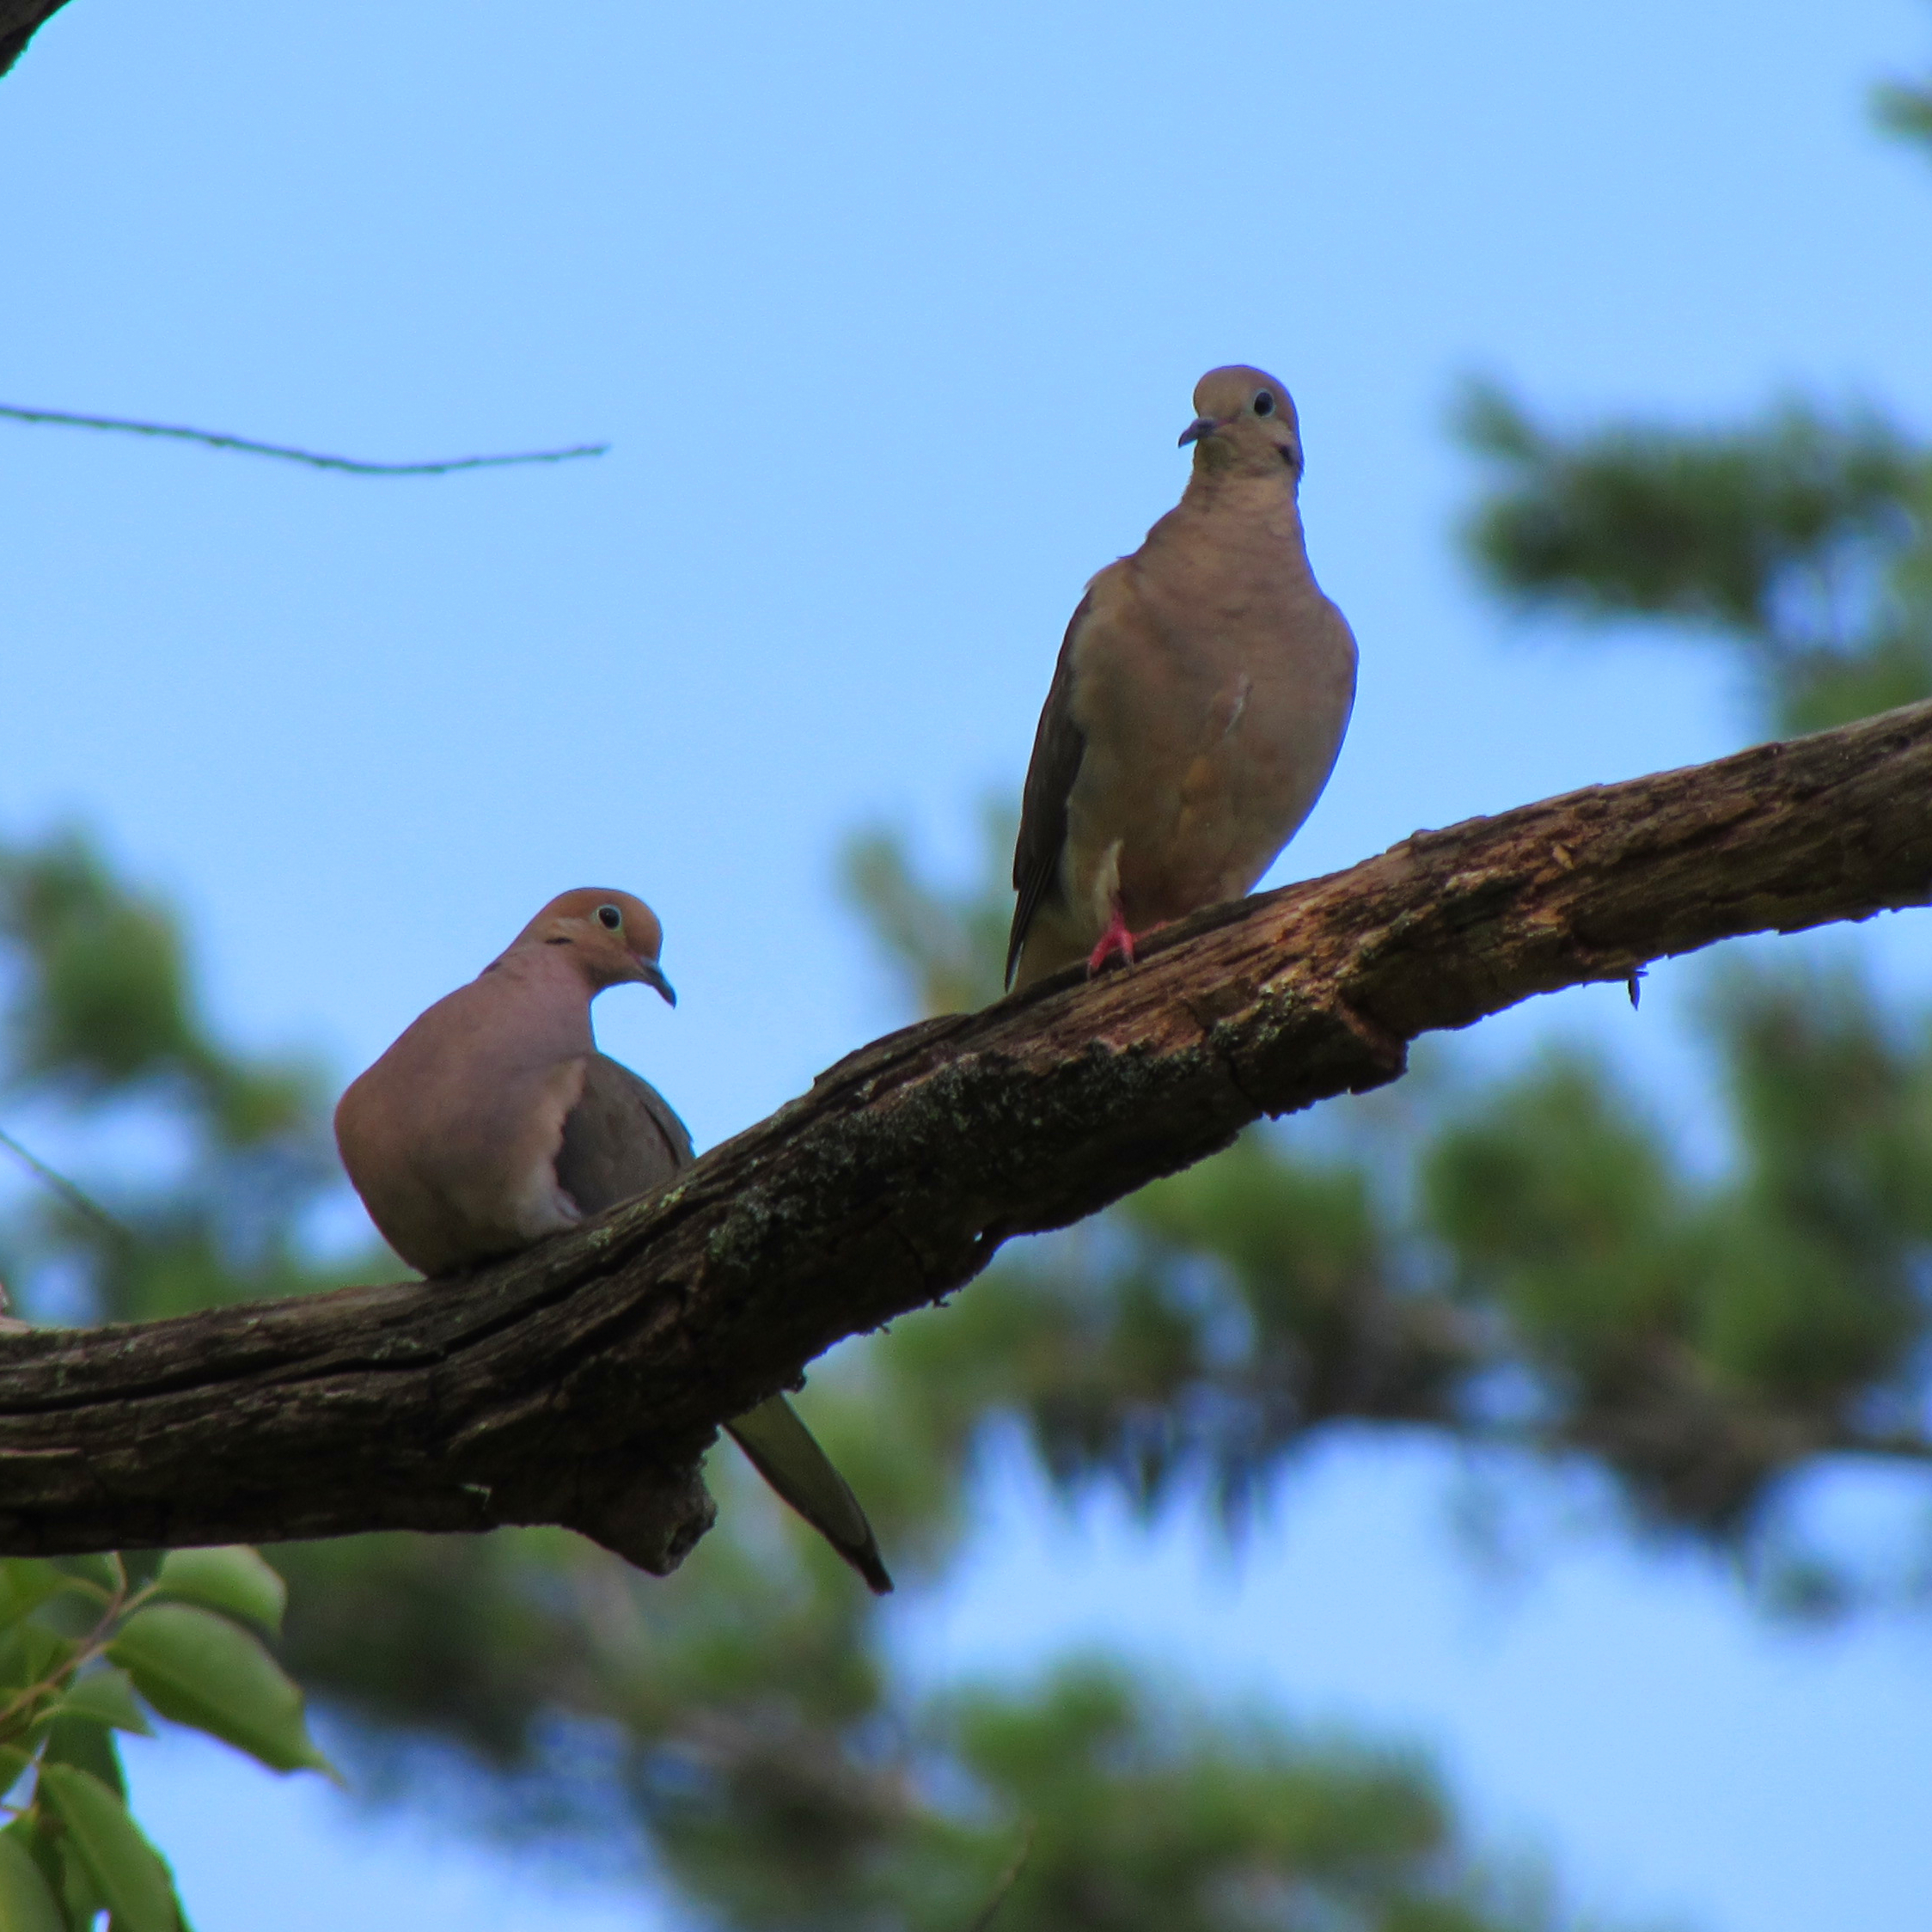 Two Mourning Doves sitting in a tree